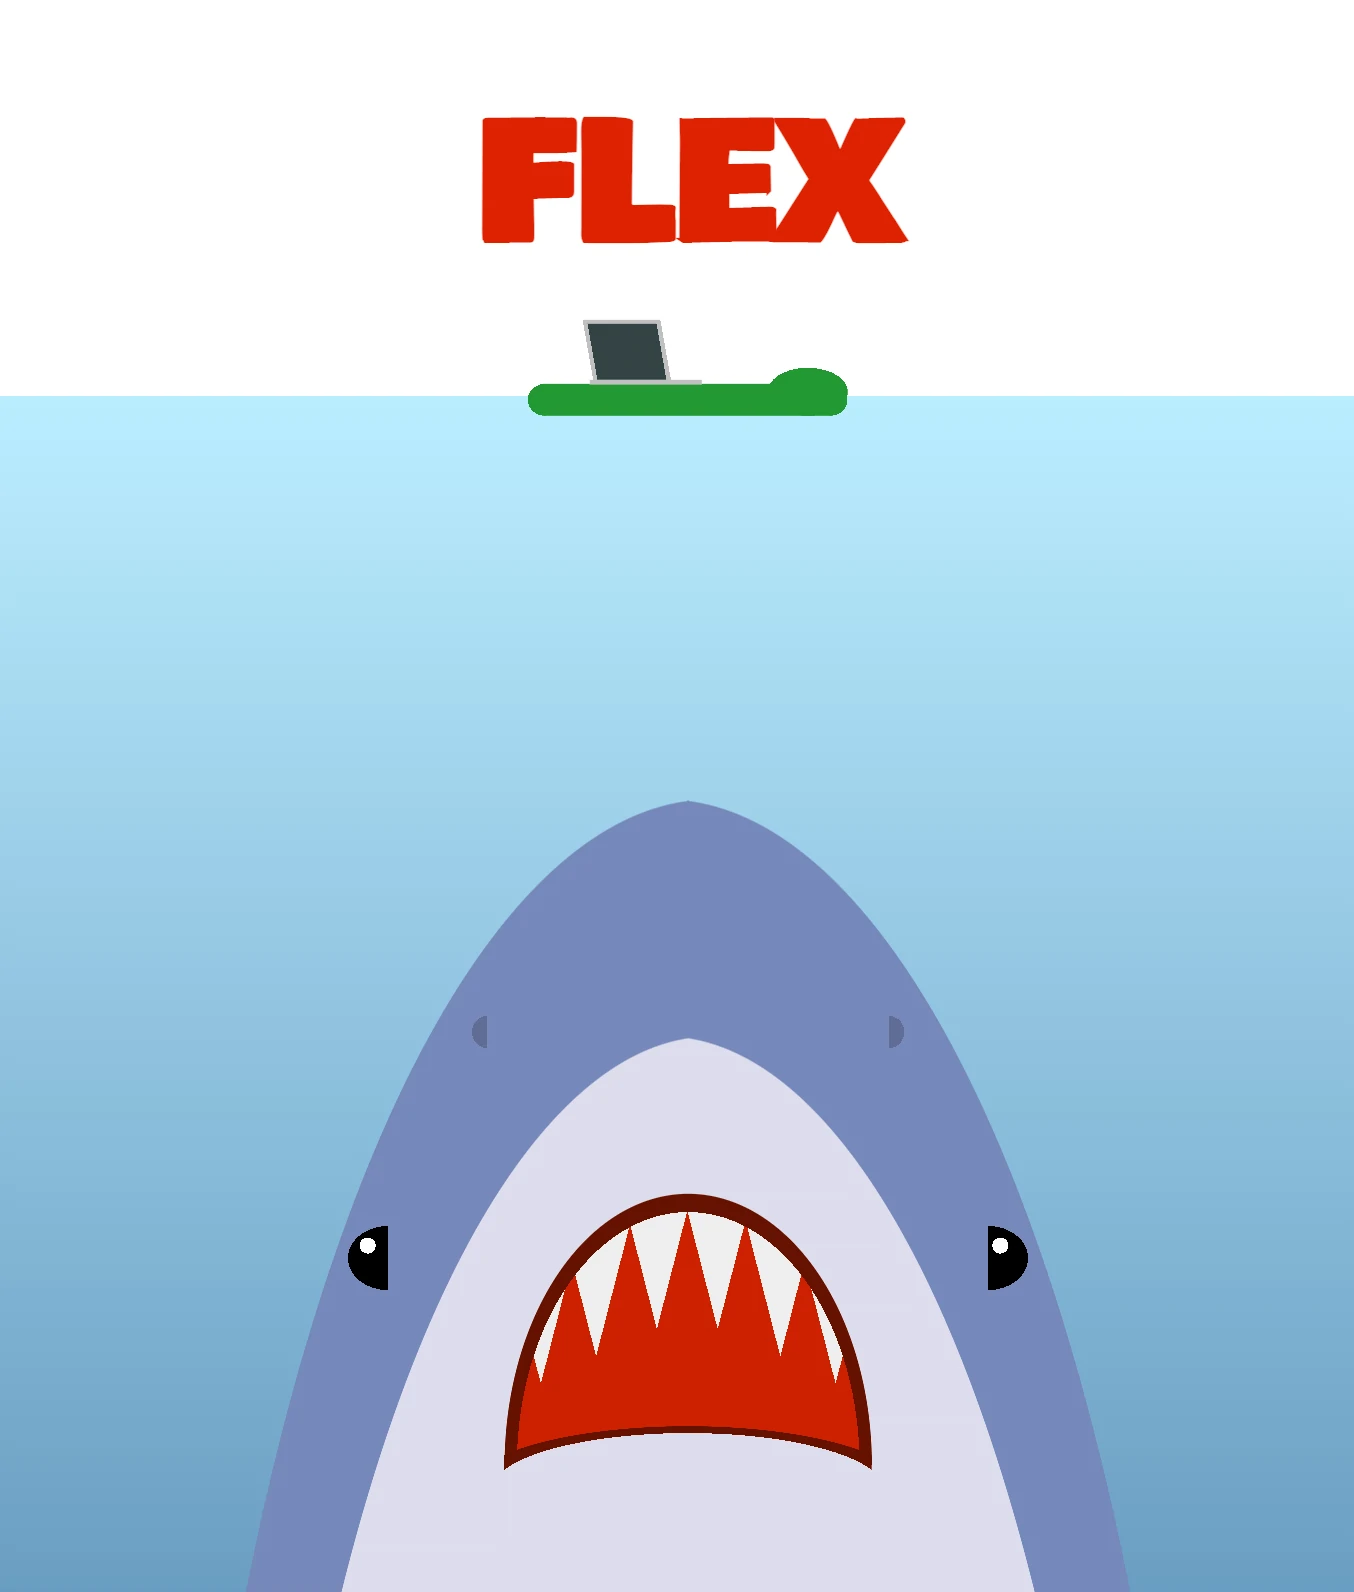 Cartoon parodying the Jaws poster, with a shark threatening a swimmer (in this case a laptop on a floatie) with the text FLEX